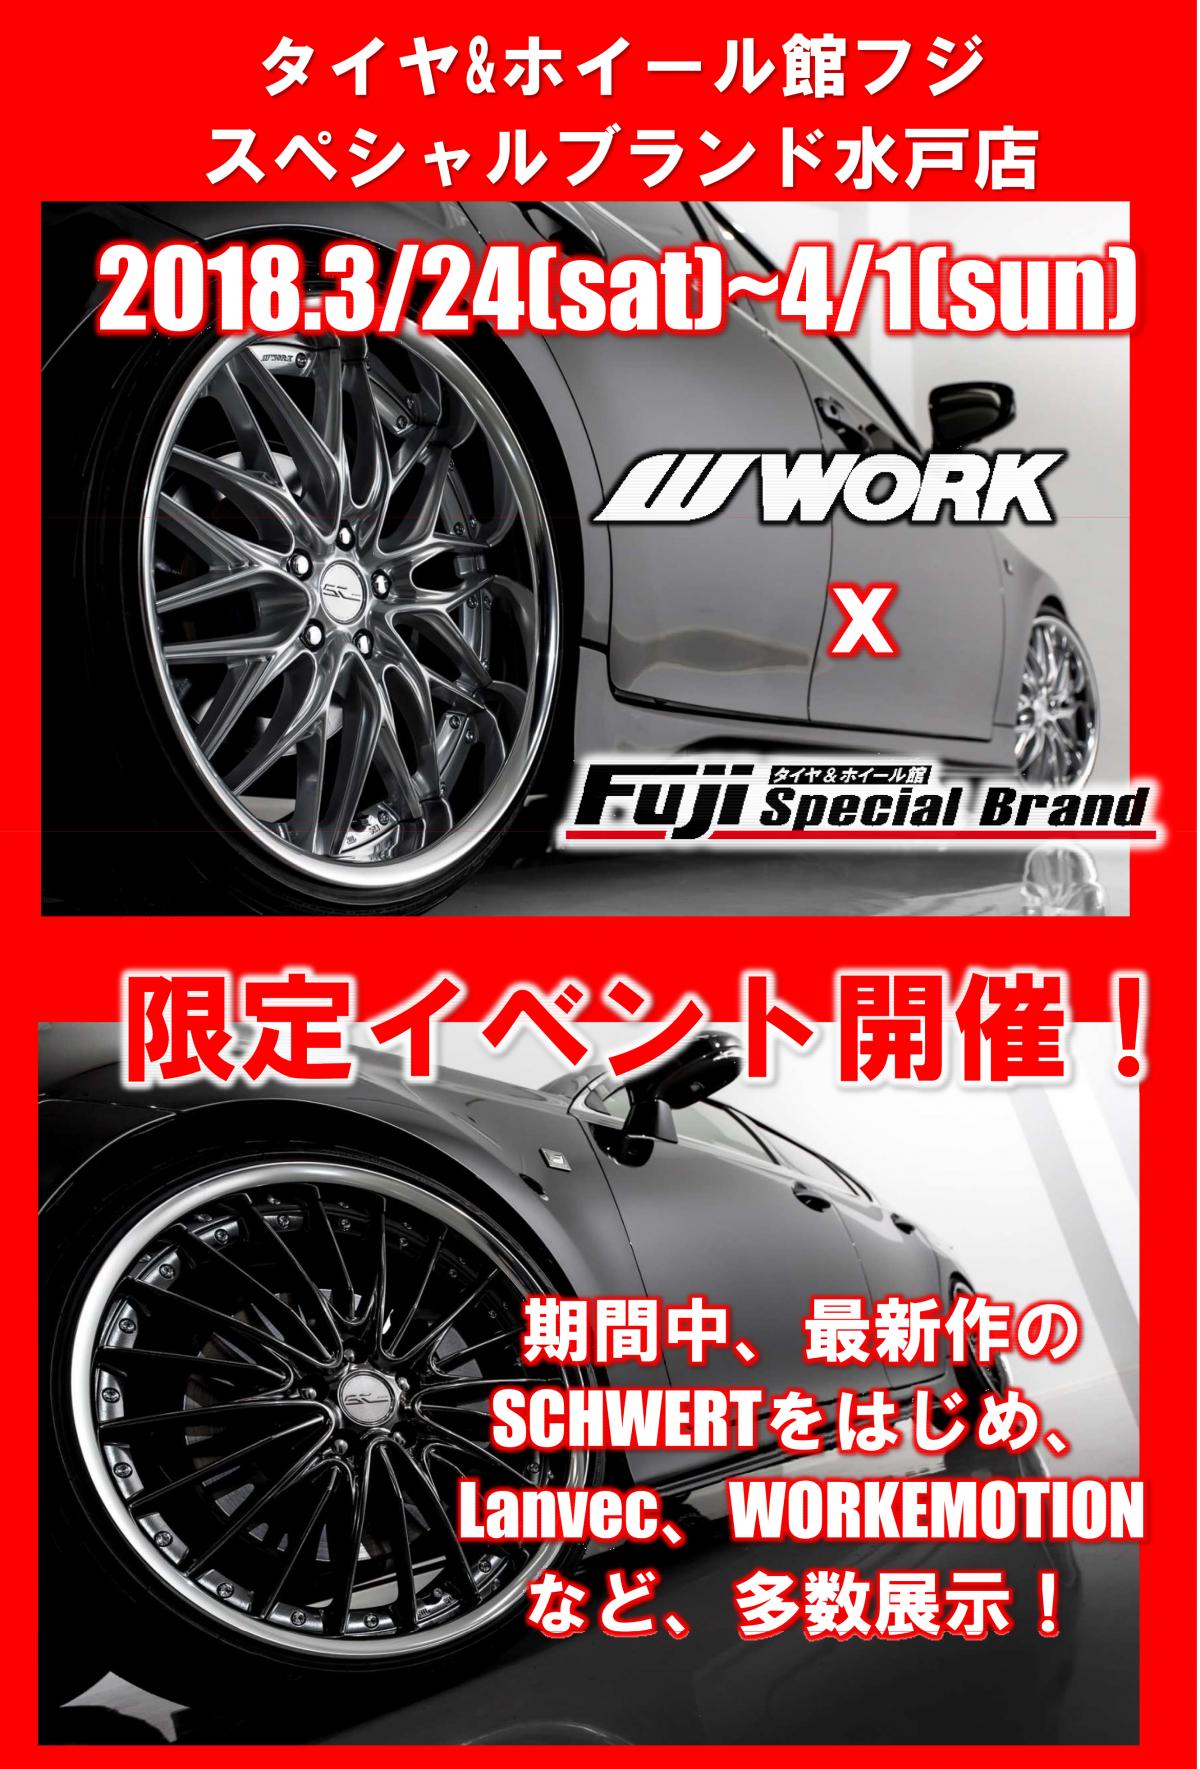 Tire & Wheel House Fuji Special Brand Mito Store Limited Event